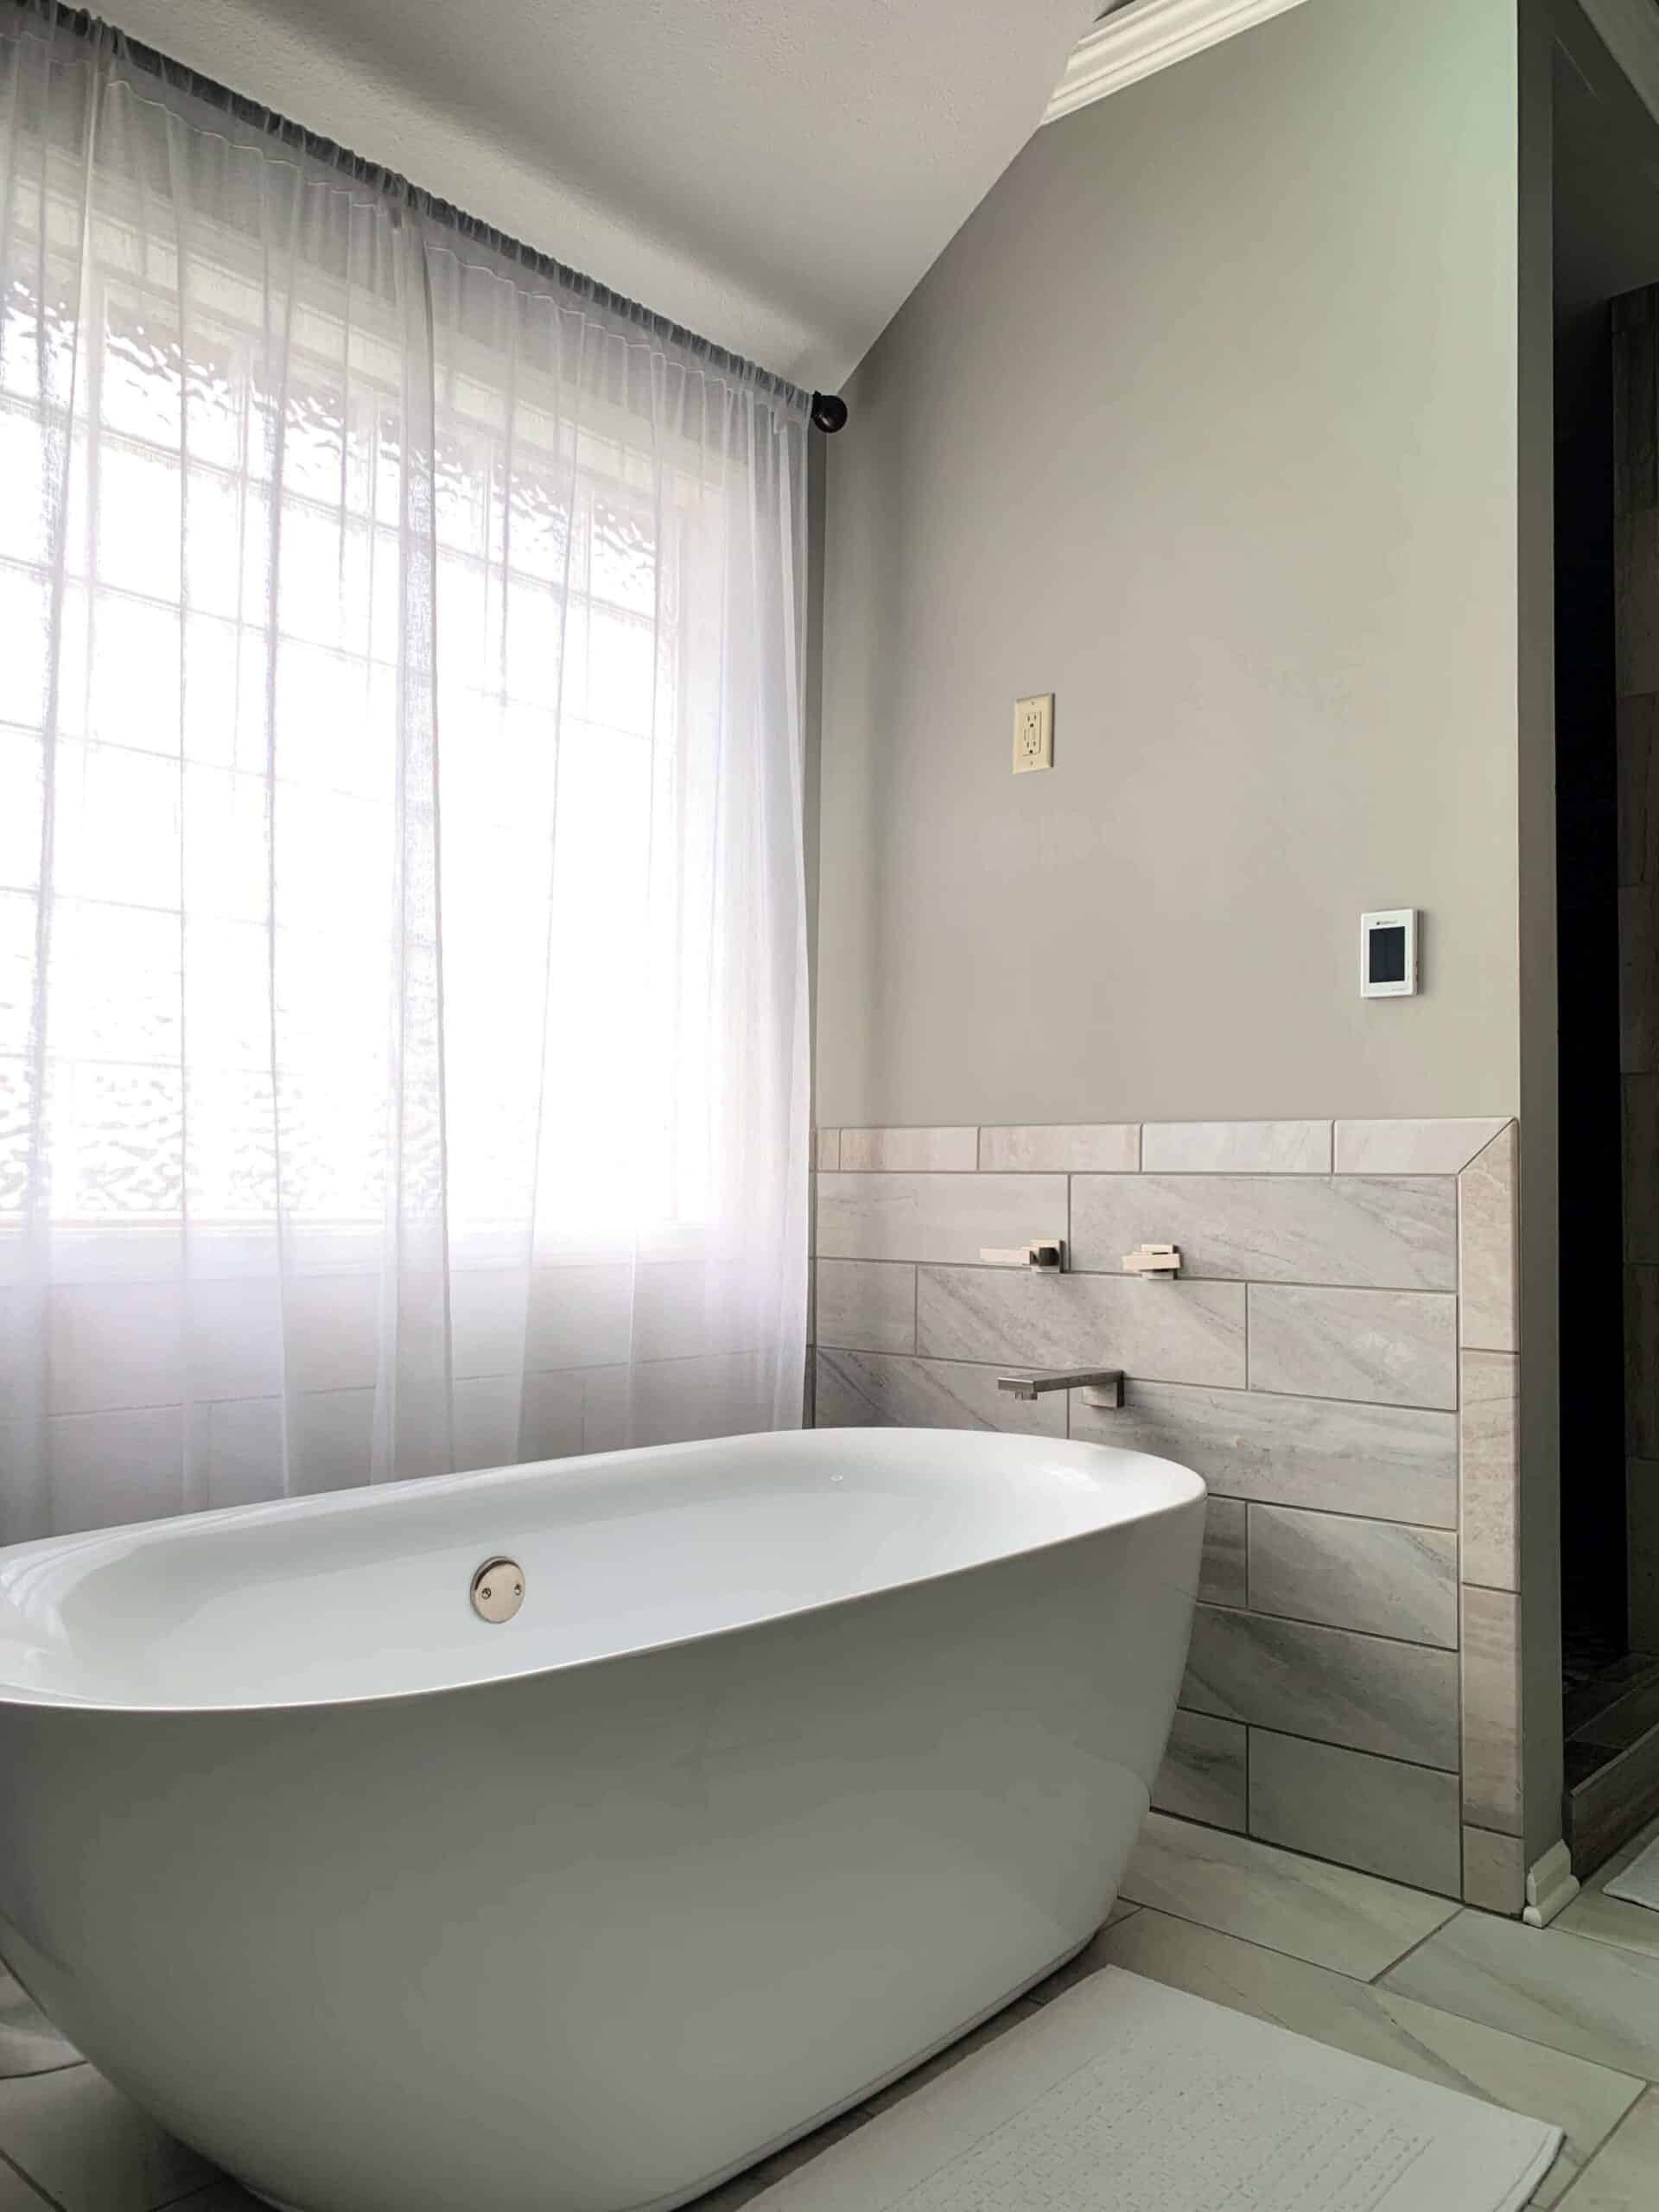 Bathroom with mindful gray paint on walls and white stand alone tub.